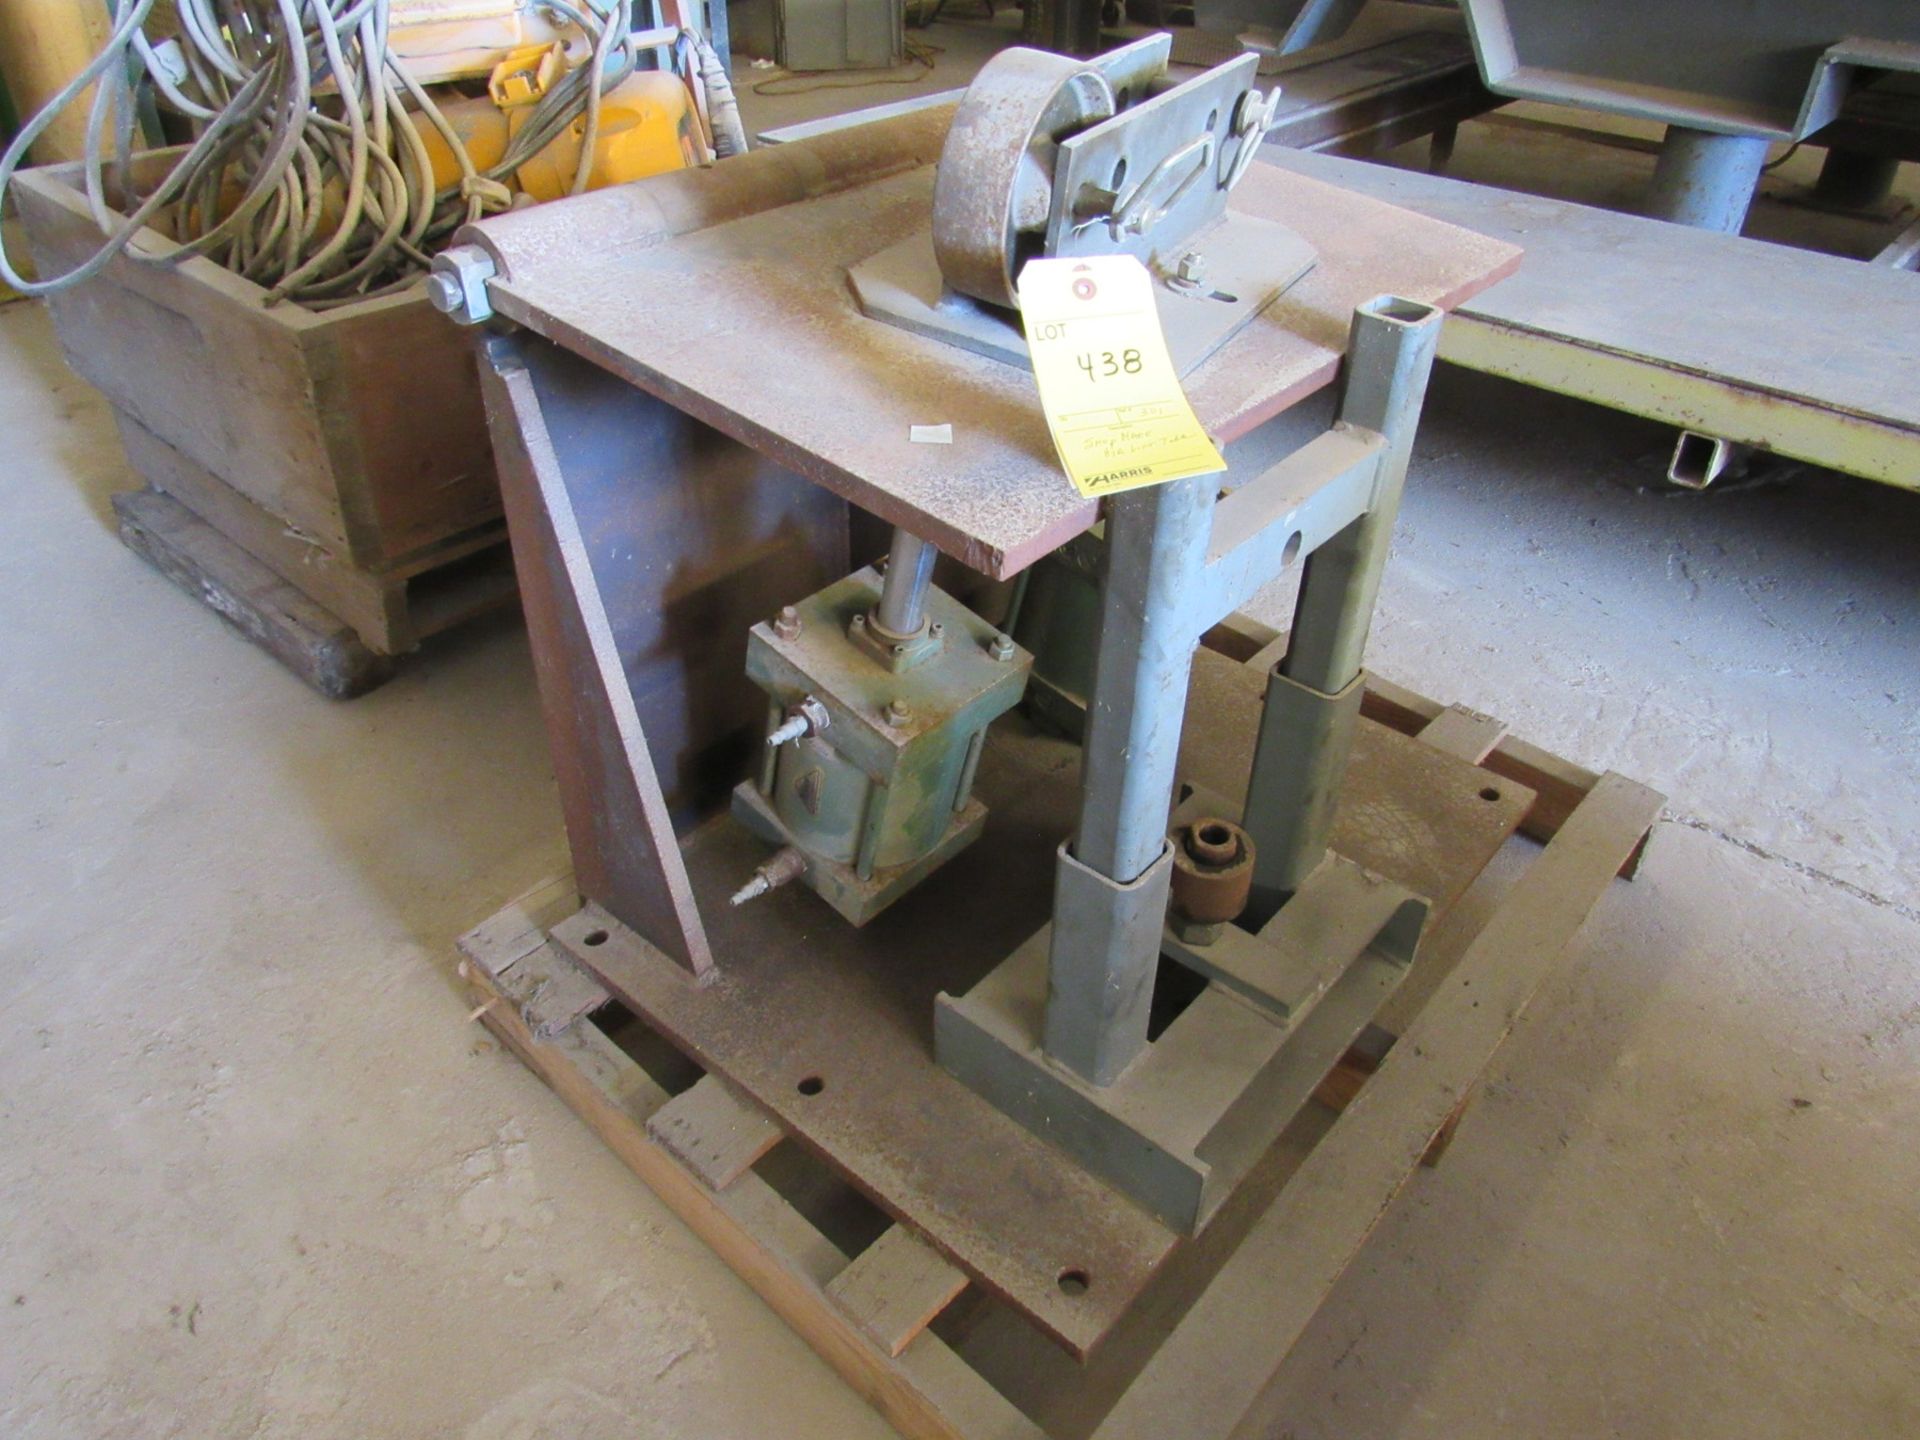 Shop Made Hydraulic Lift Table - Image 3 of 3